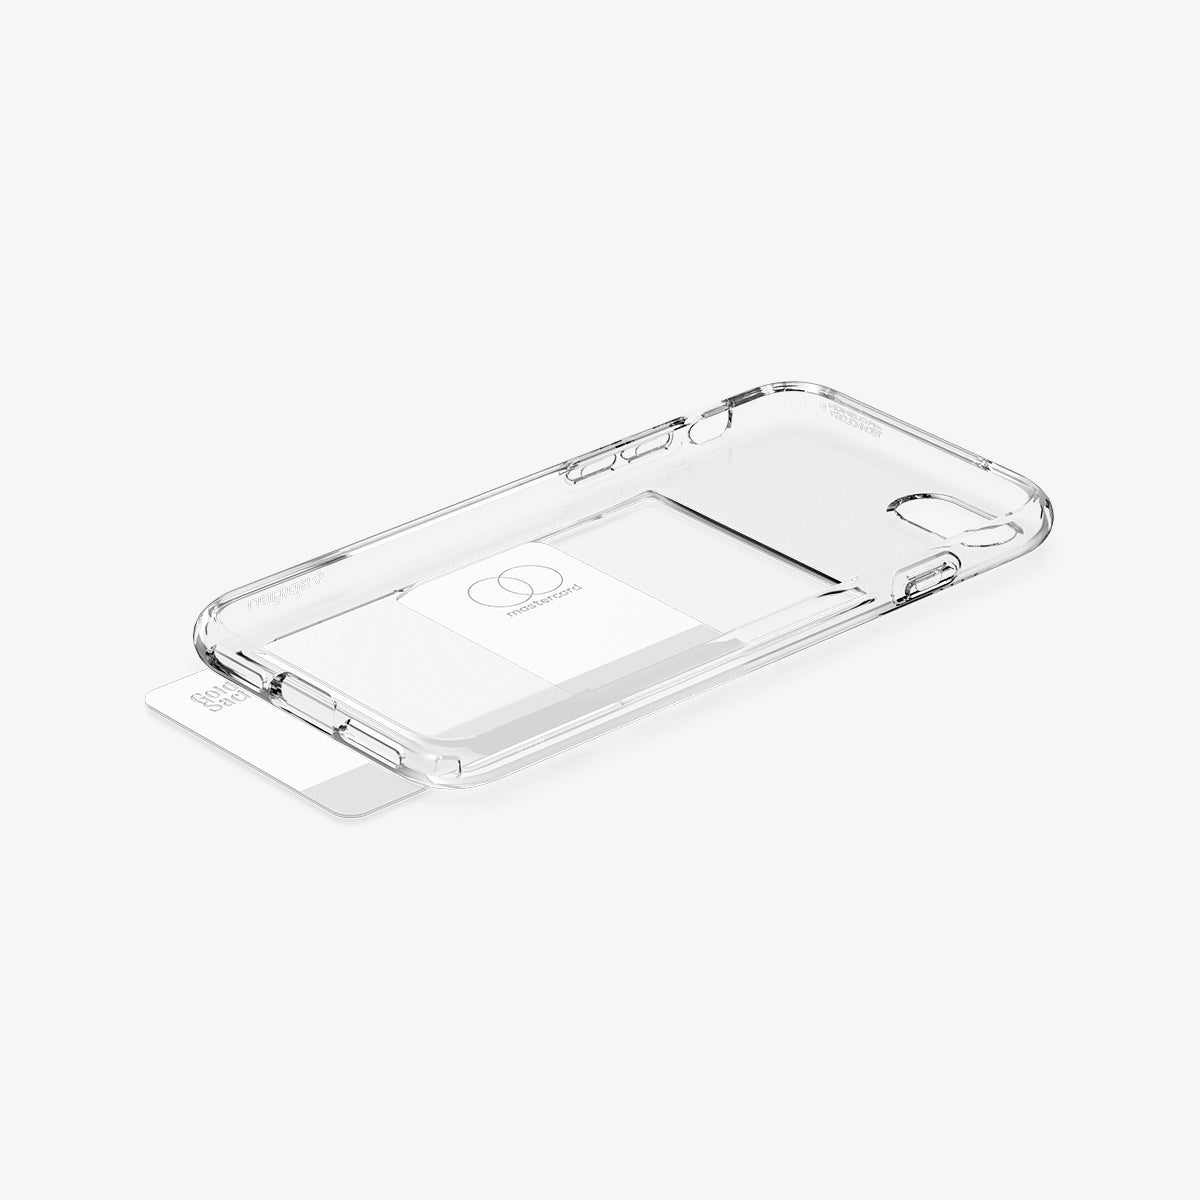 ACS04359 - iPhone SE Card Slot Case in crystal clear laying flat